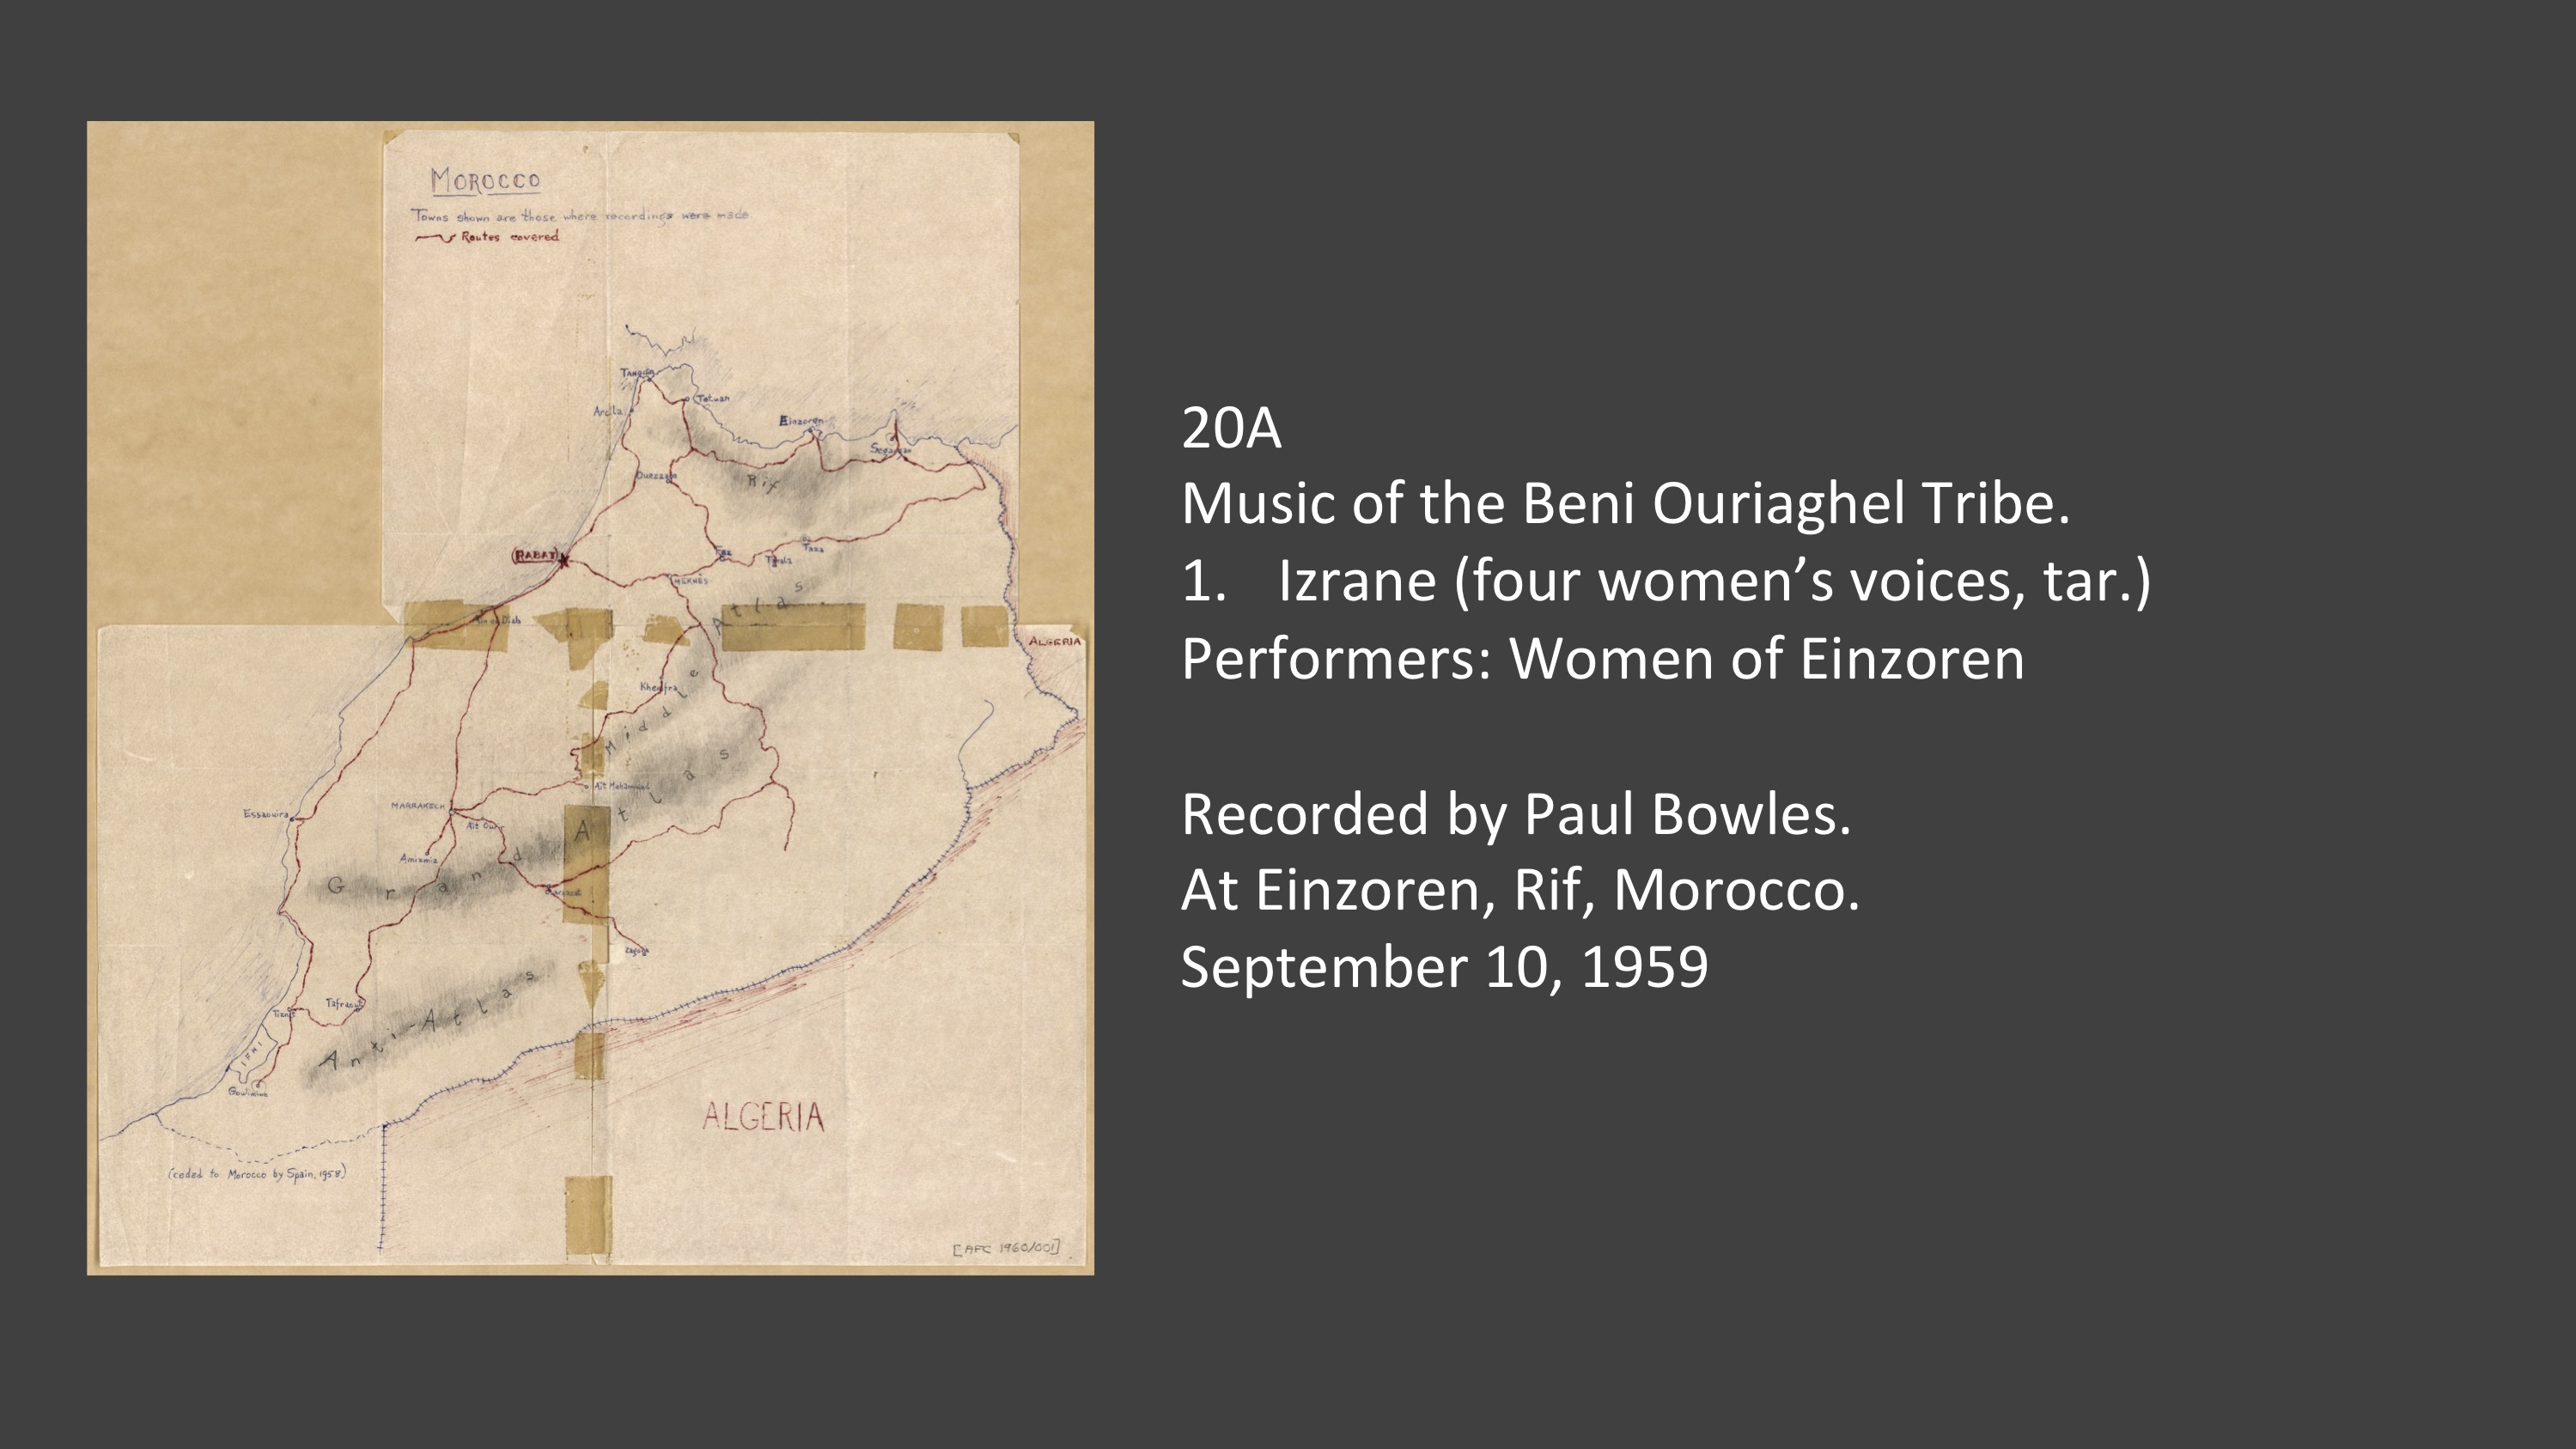 20A 1. Izrane (four women’s voices, tar.) 
Music of the Beni Ouriaghel Tribe.

Performers: Women of Einzoren

Recorded by Paul Bowles.
At Einzoren, Rif, Morocco.
September 10, 1959
